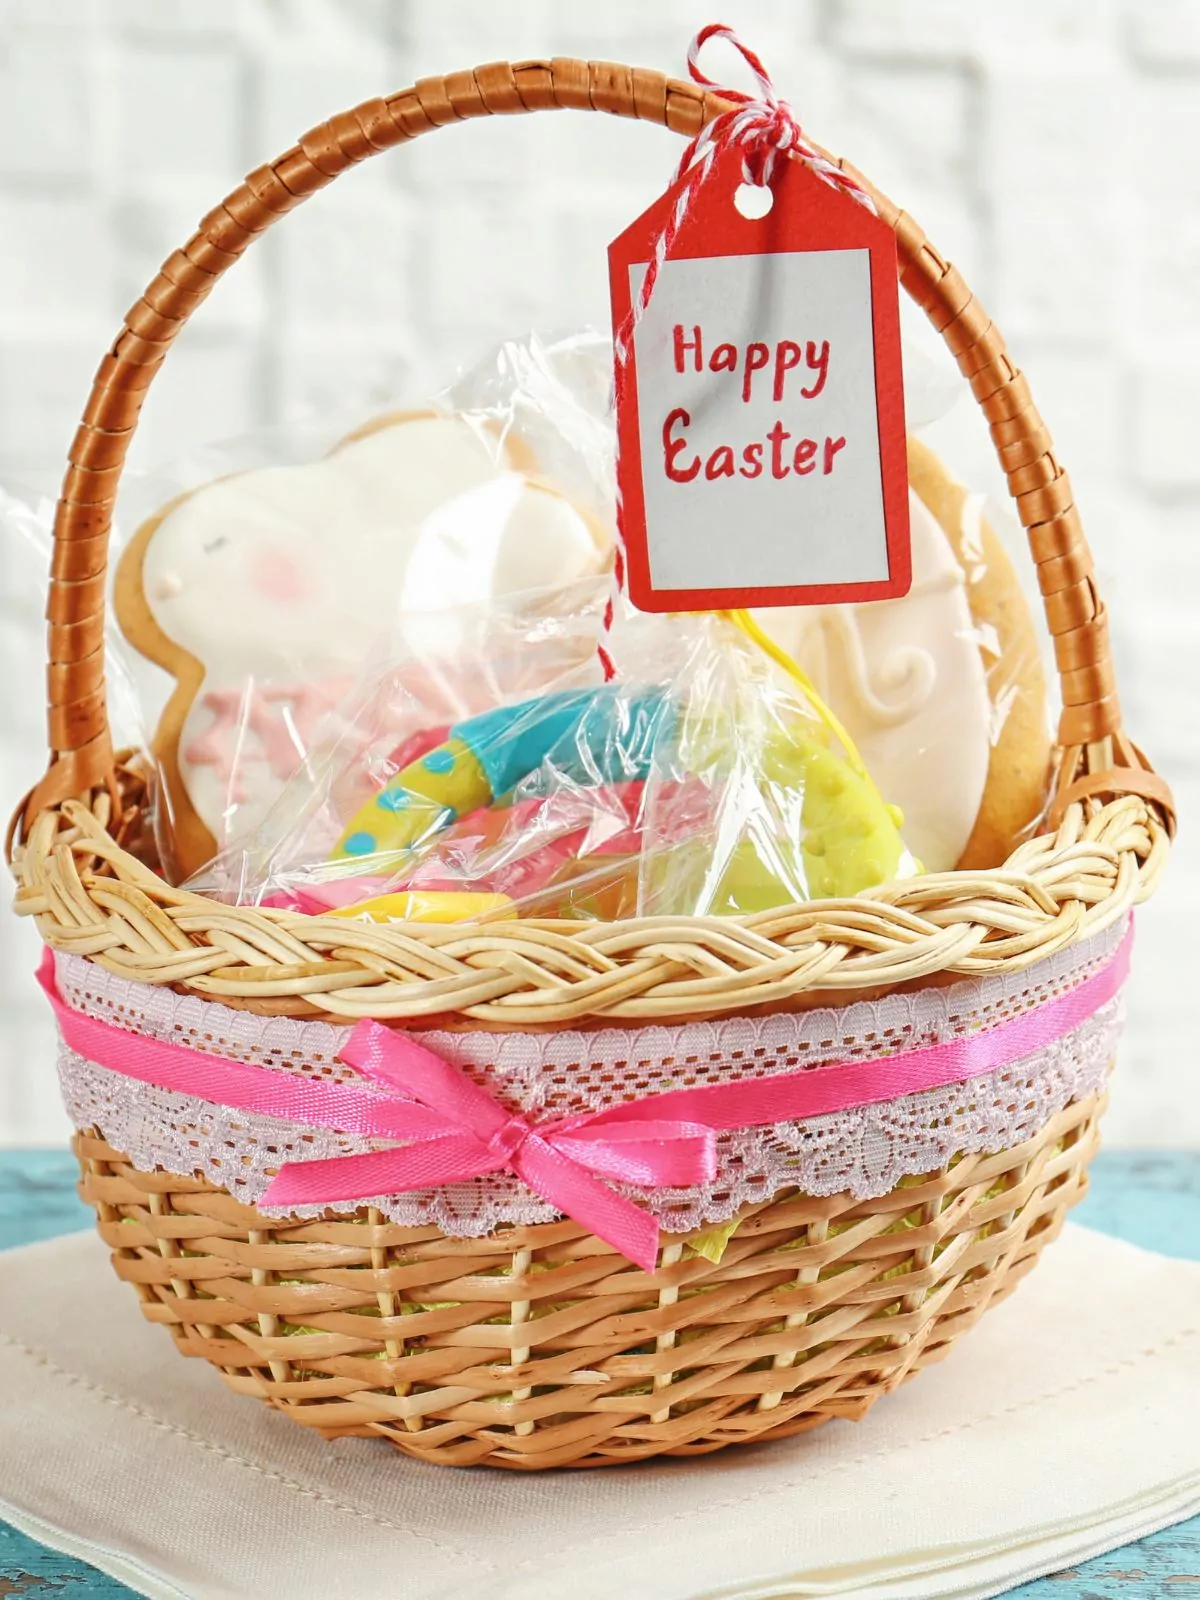 Wicker Easter basket filled with freshly baked, homemade cookies decorated for the holiday.